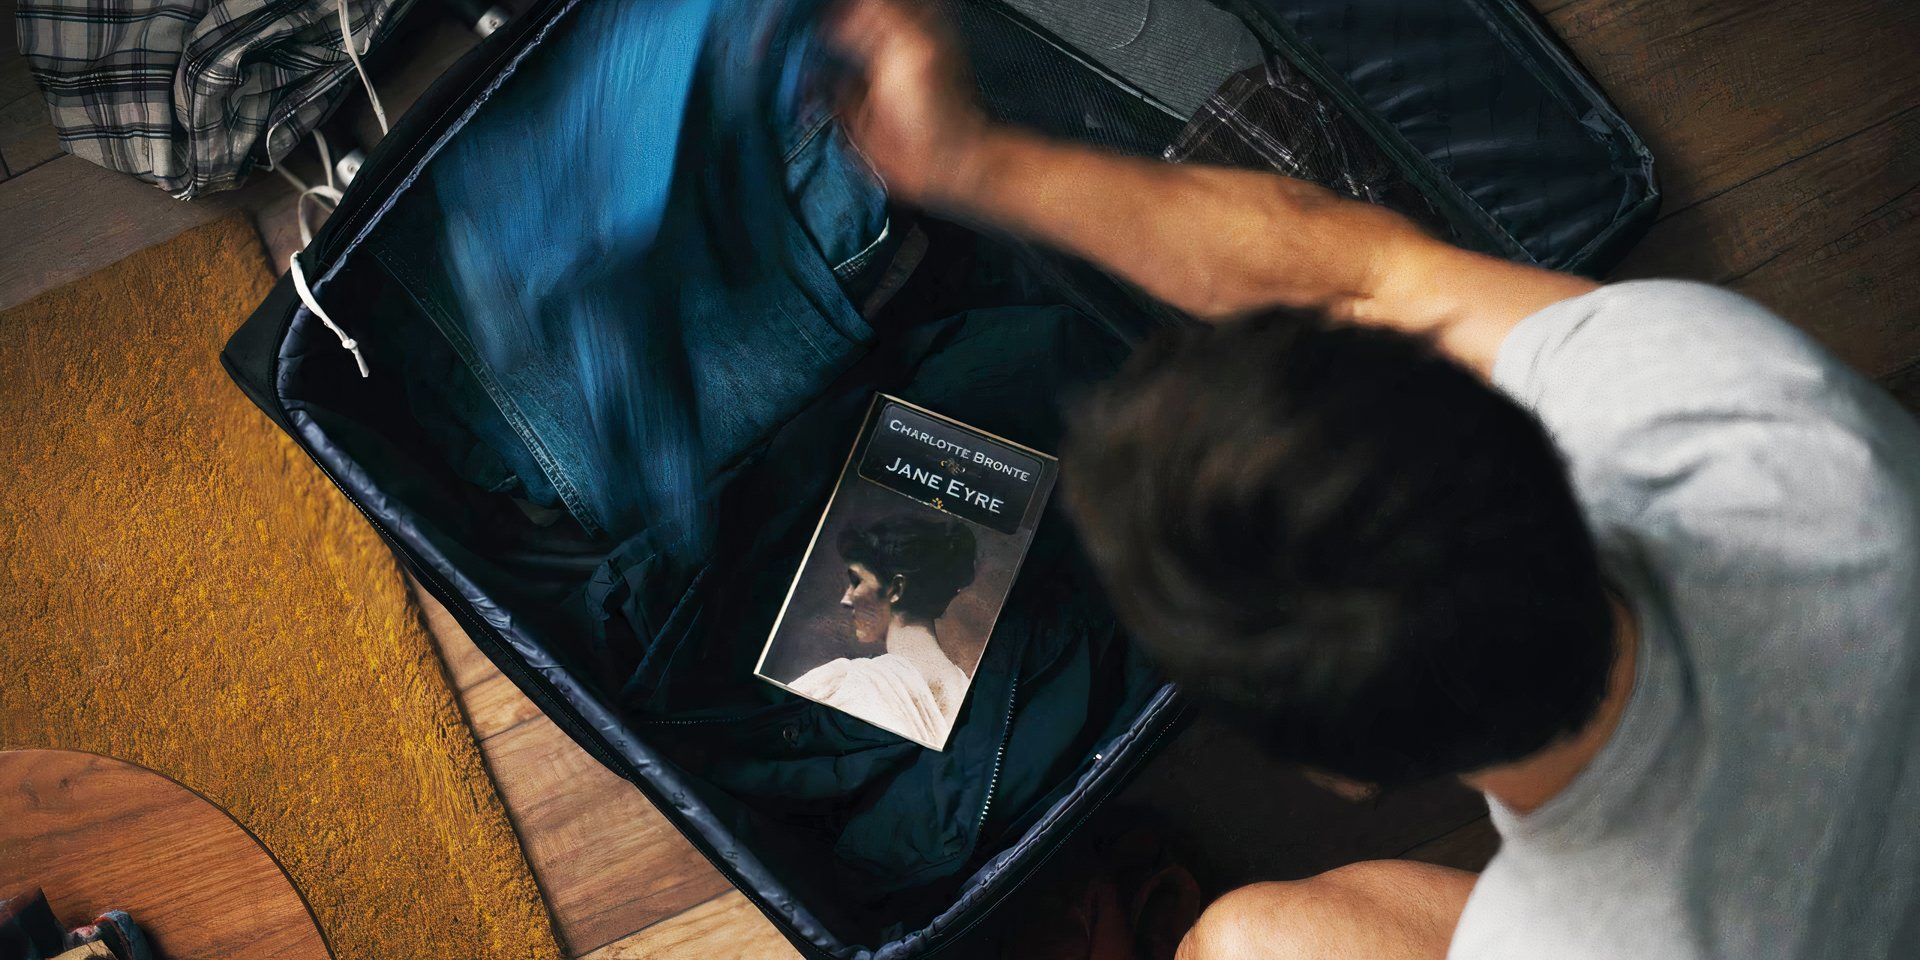 Barbarian Jane Eyre book in Tess' suitcase